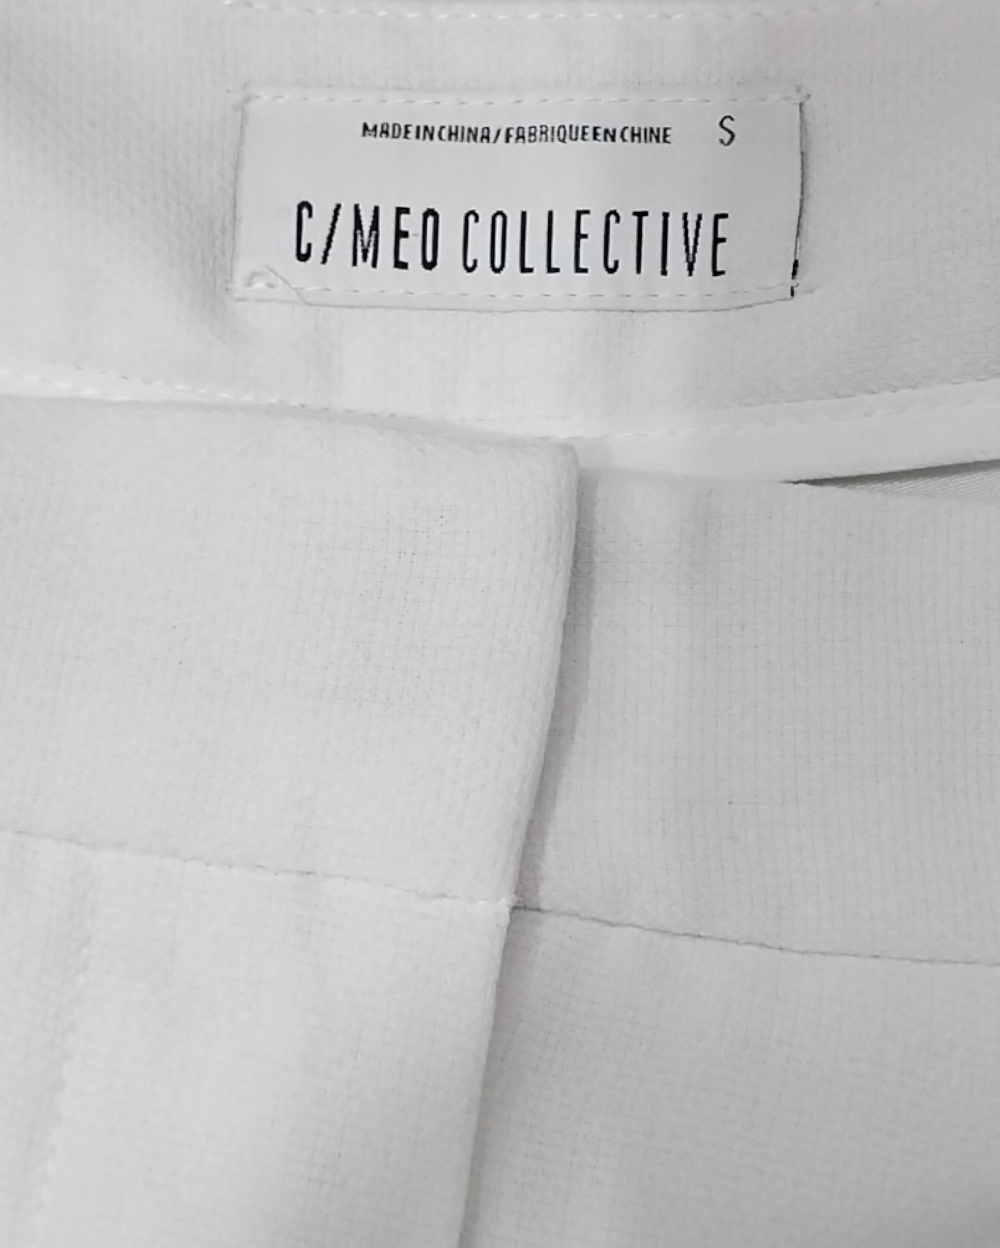 Shorts Casuales C/ meo collective